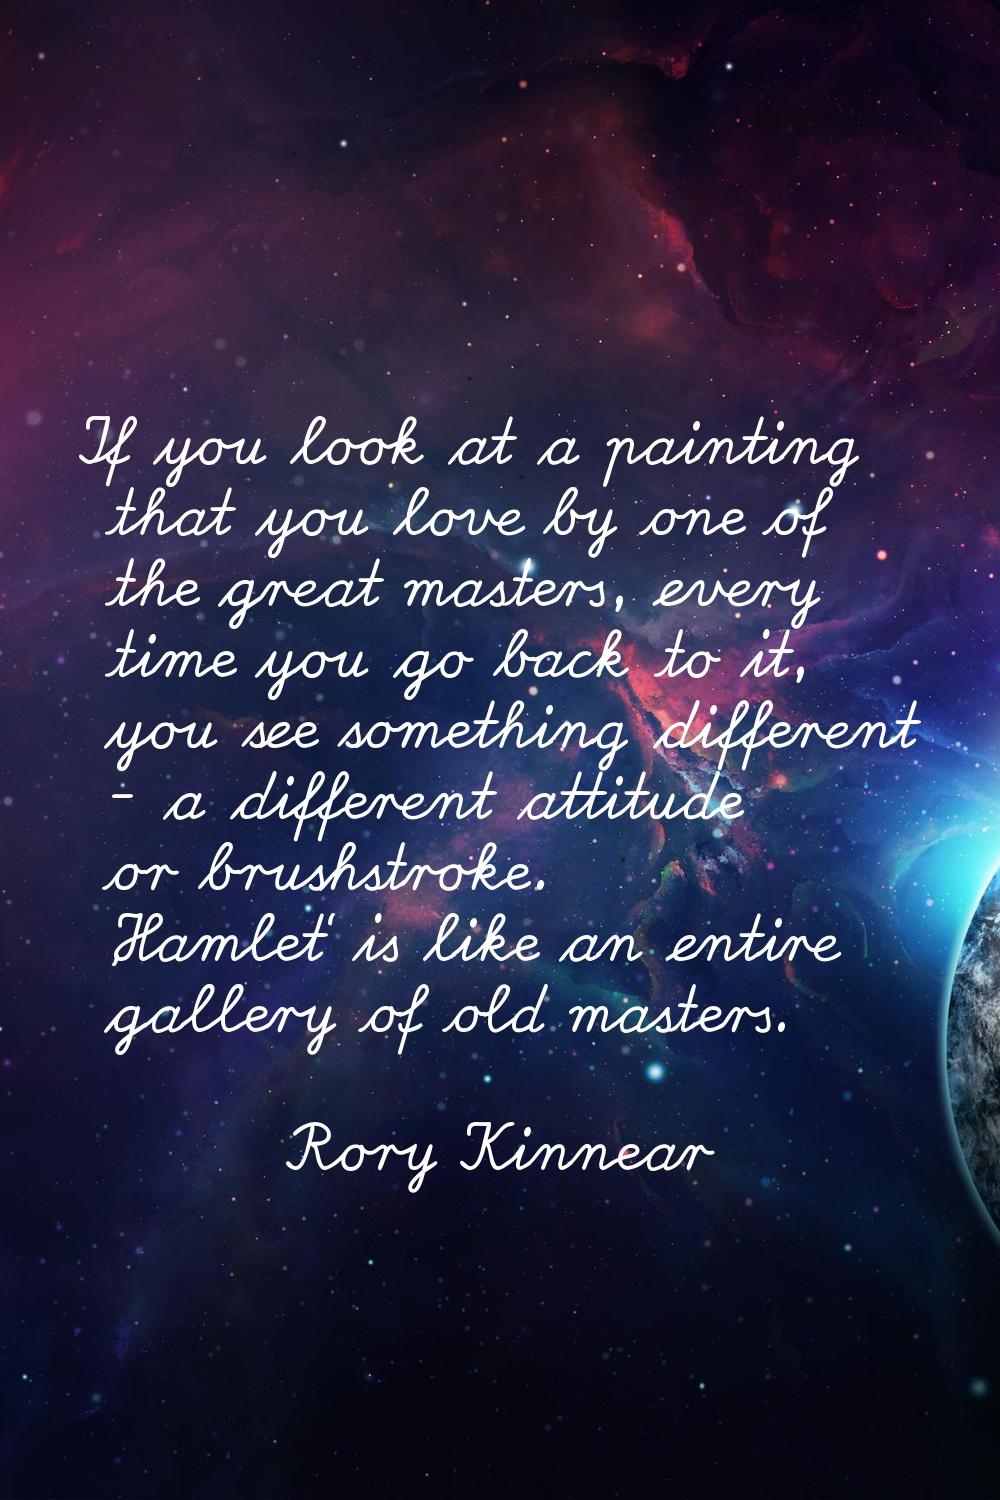 If you look at a painting that you love by one of the great masters, every time you go back to it, 